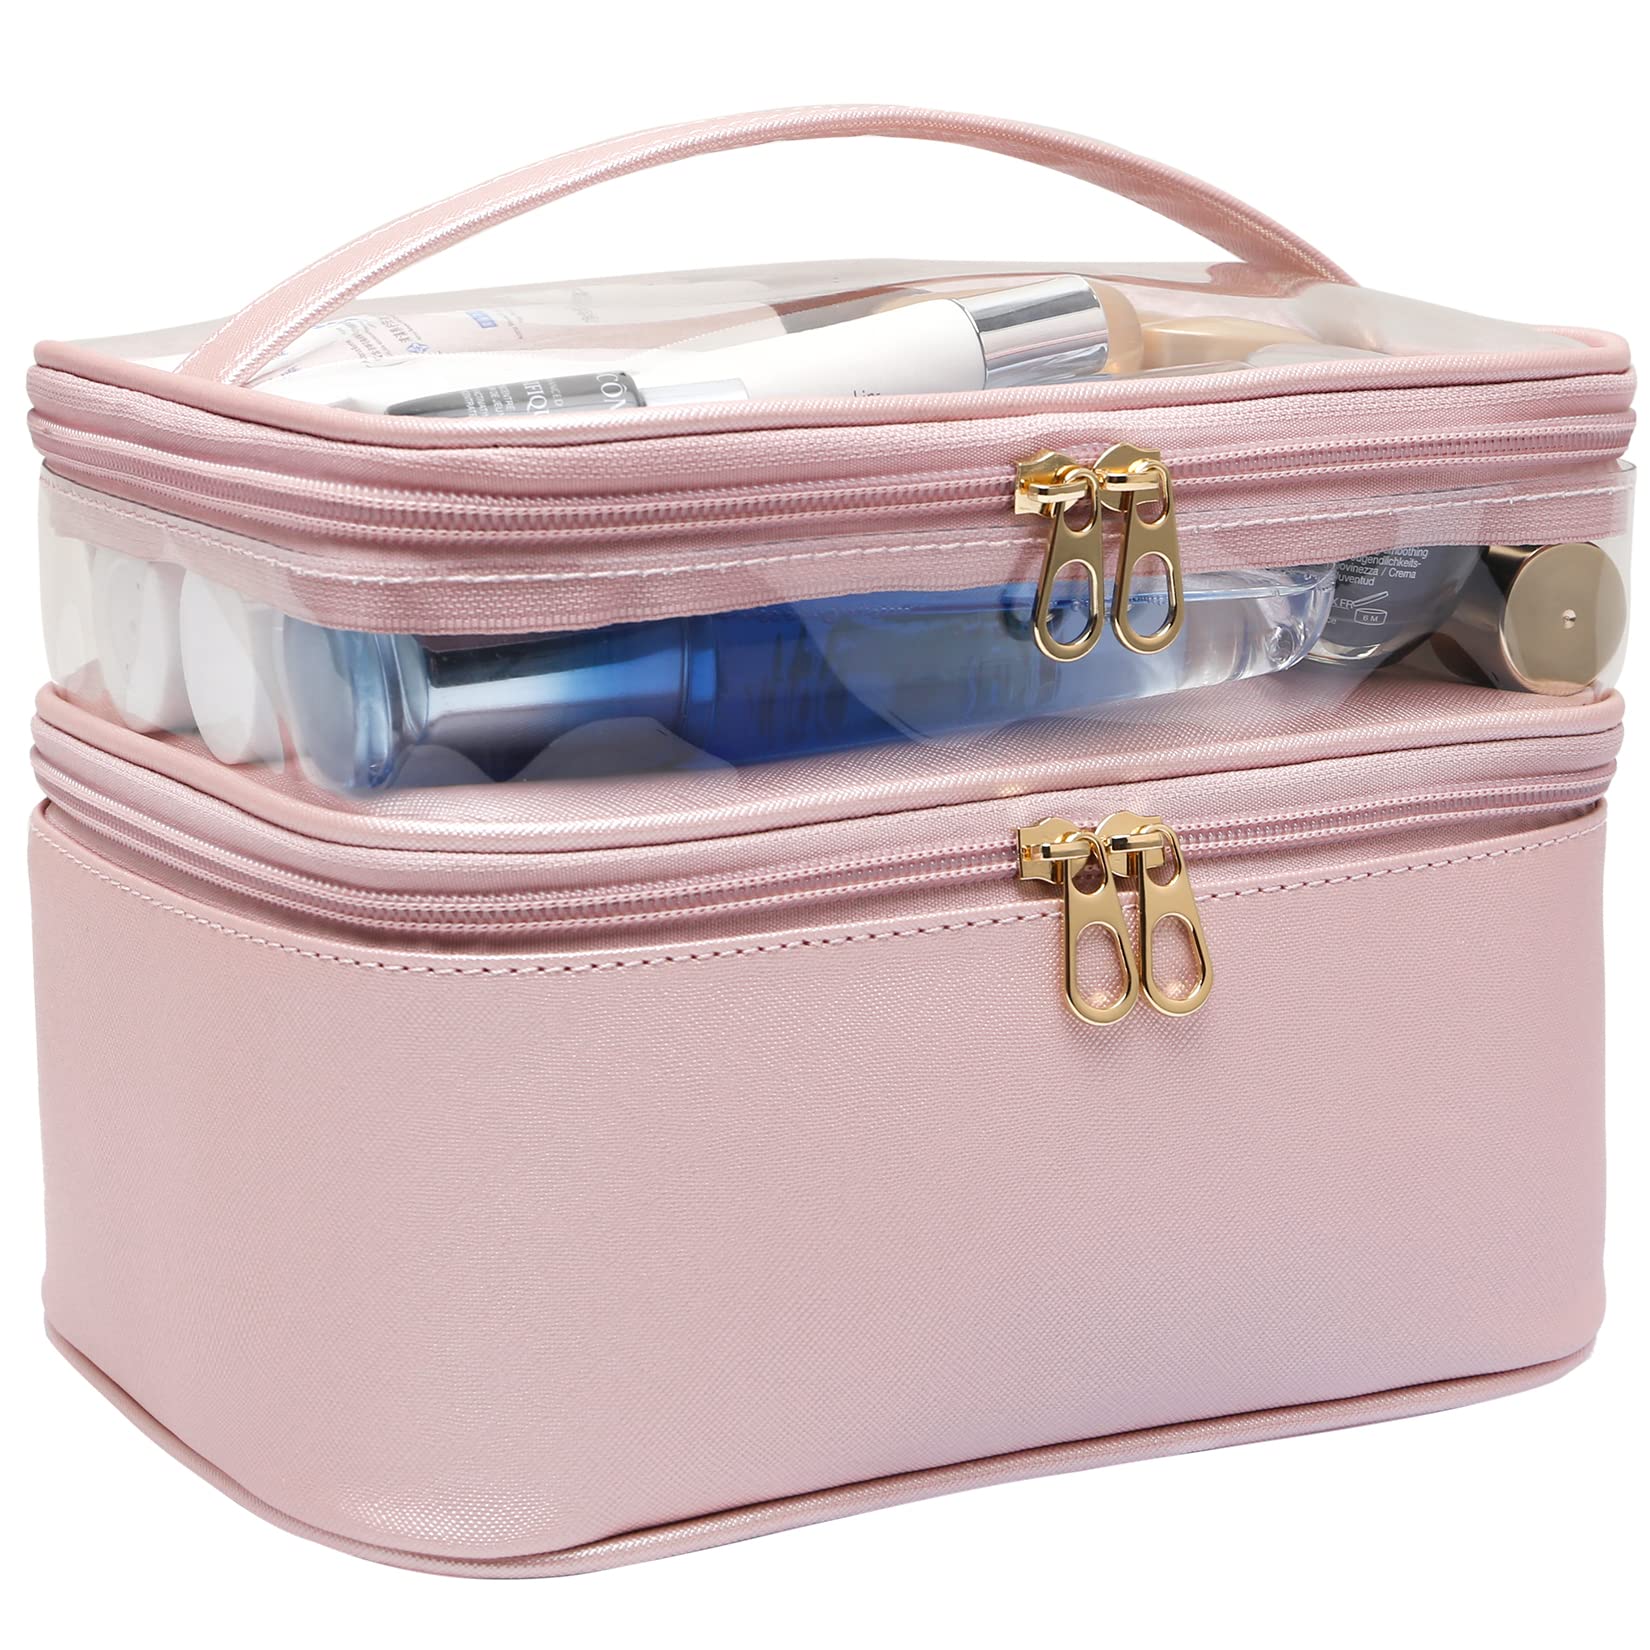 8 travel cosmetic bags that hold everything you need - Reviewed